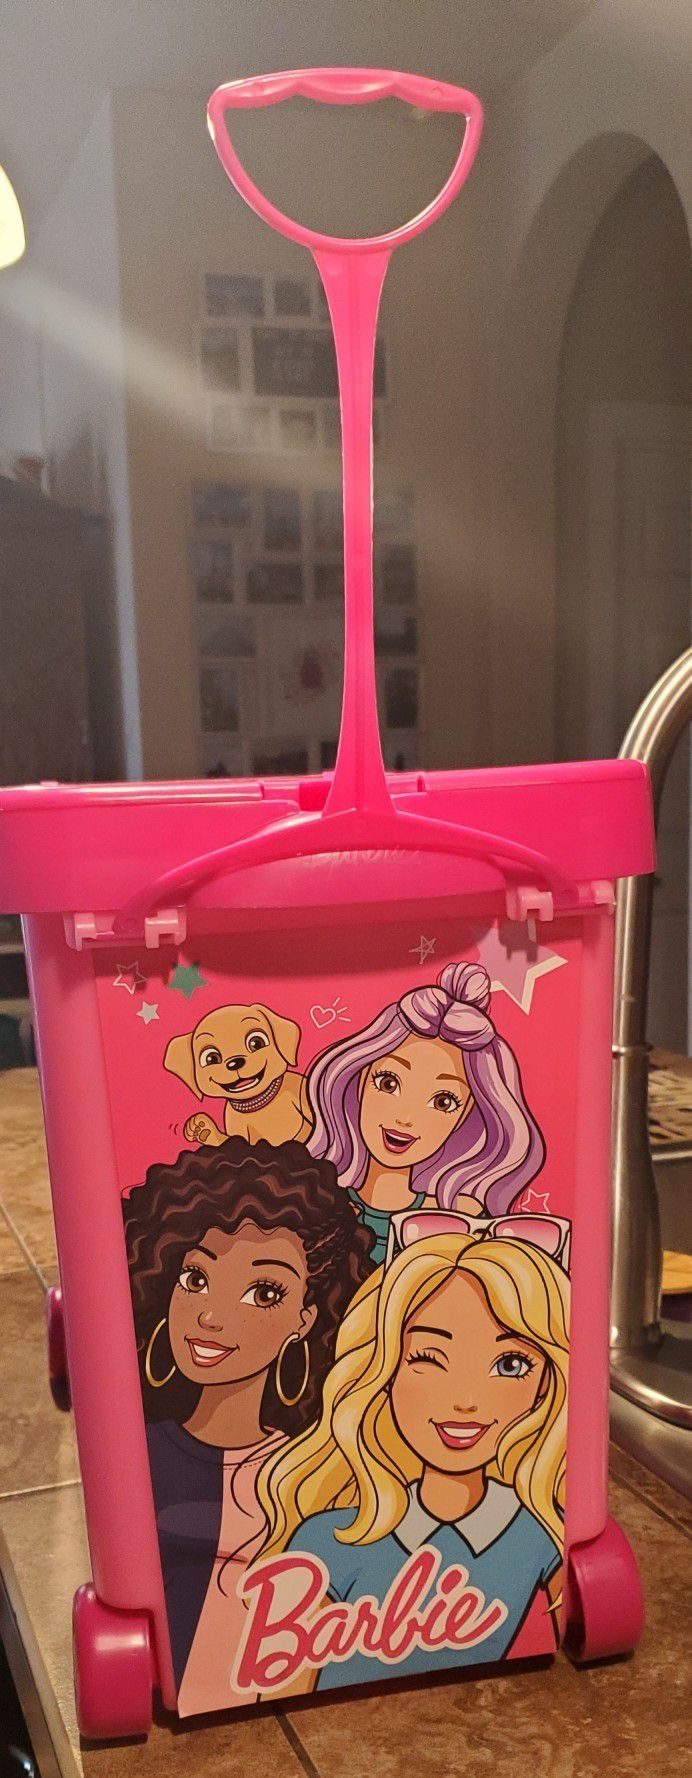 Barbie Carry Case On Wheels w/ Barbies And Clothes.